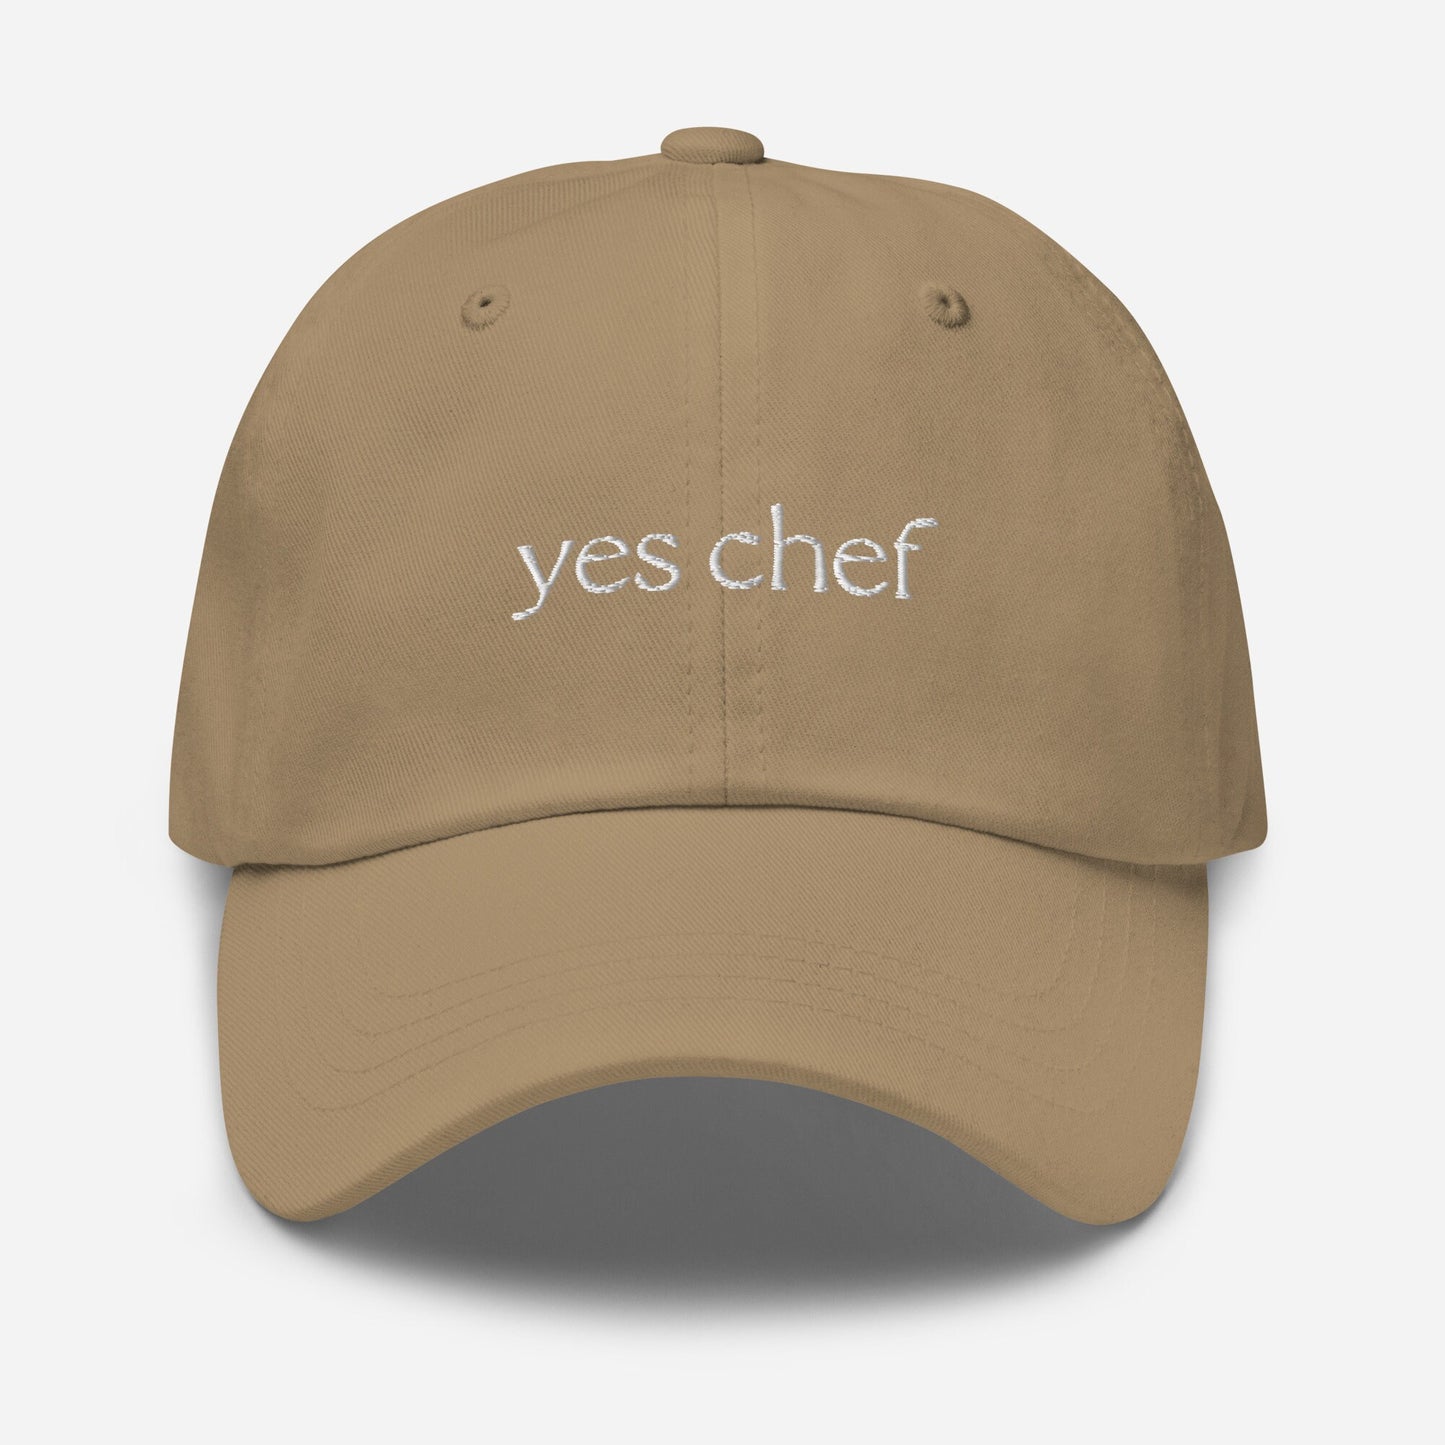 Yes Chef Dad Hat - Funny Gift for Foodies, Home Cooks, Bakers & Culinary Students - Embroidered Cotton Cap